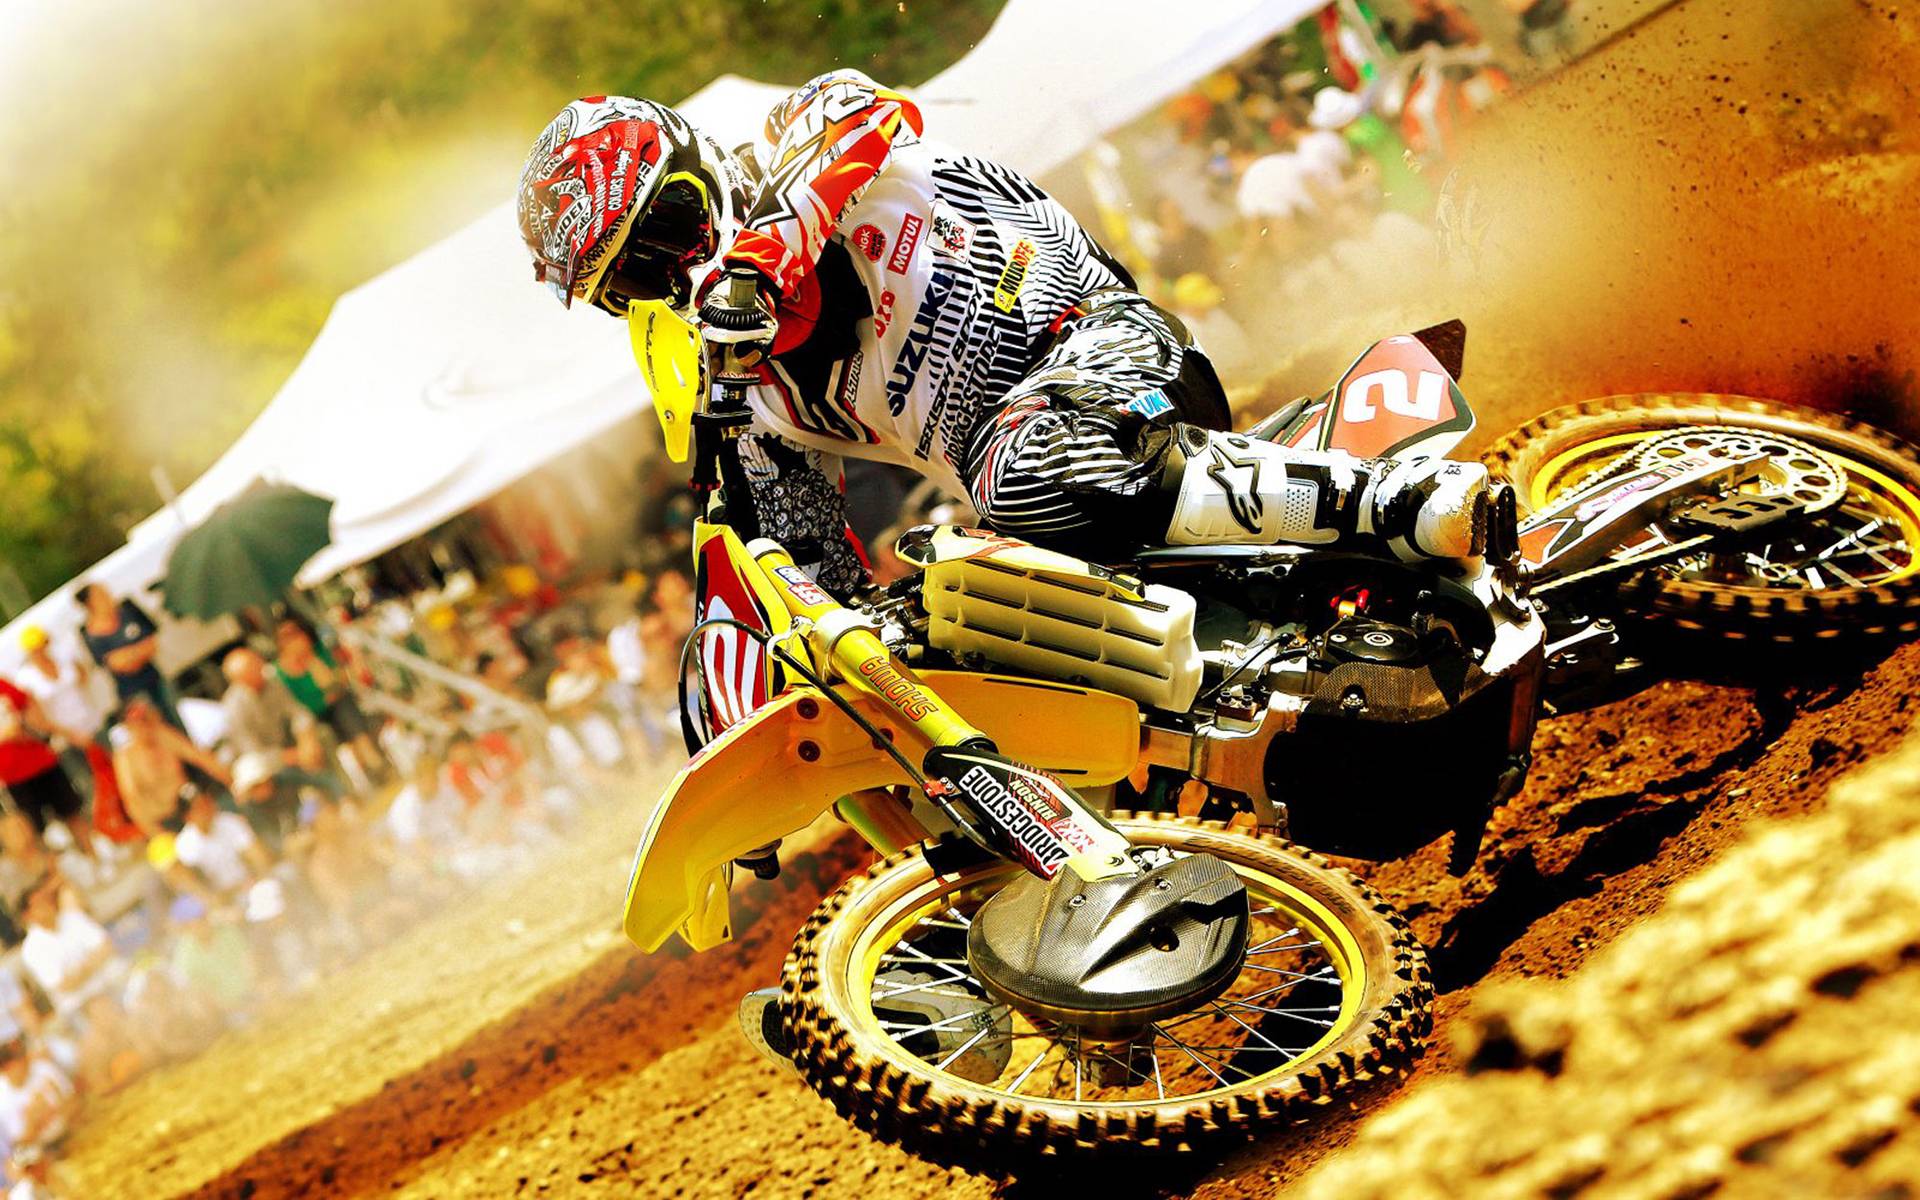 Motocross Wallpaper hd wallpapers ›› Page 0 | ForWallpapers.com